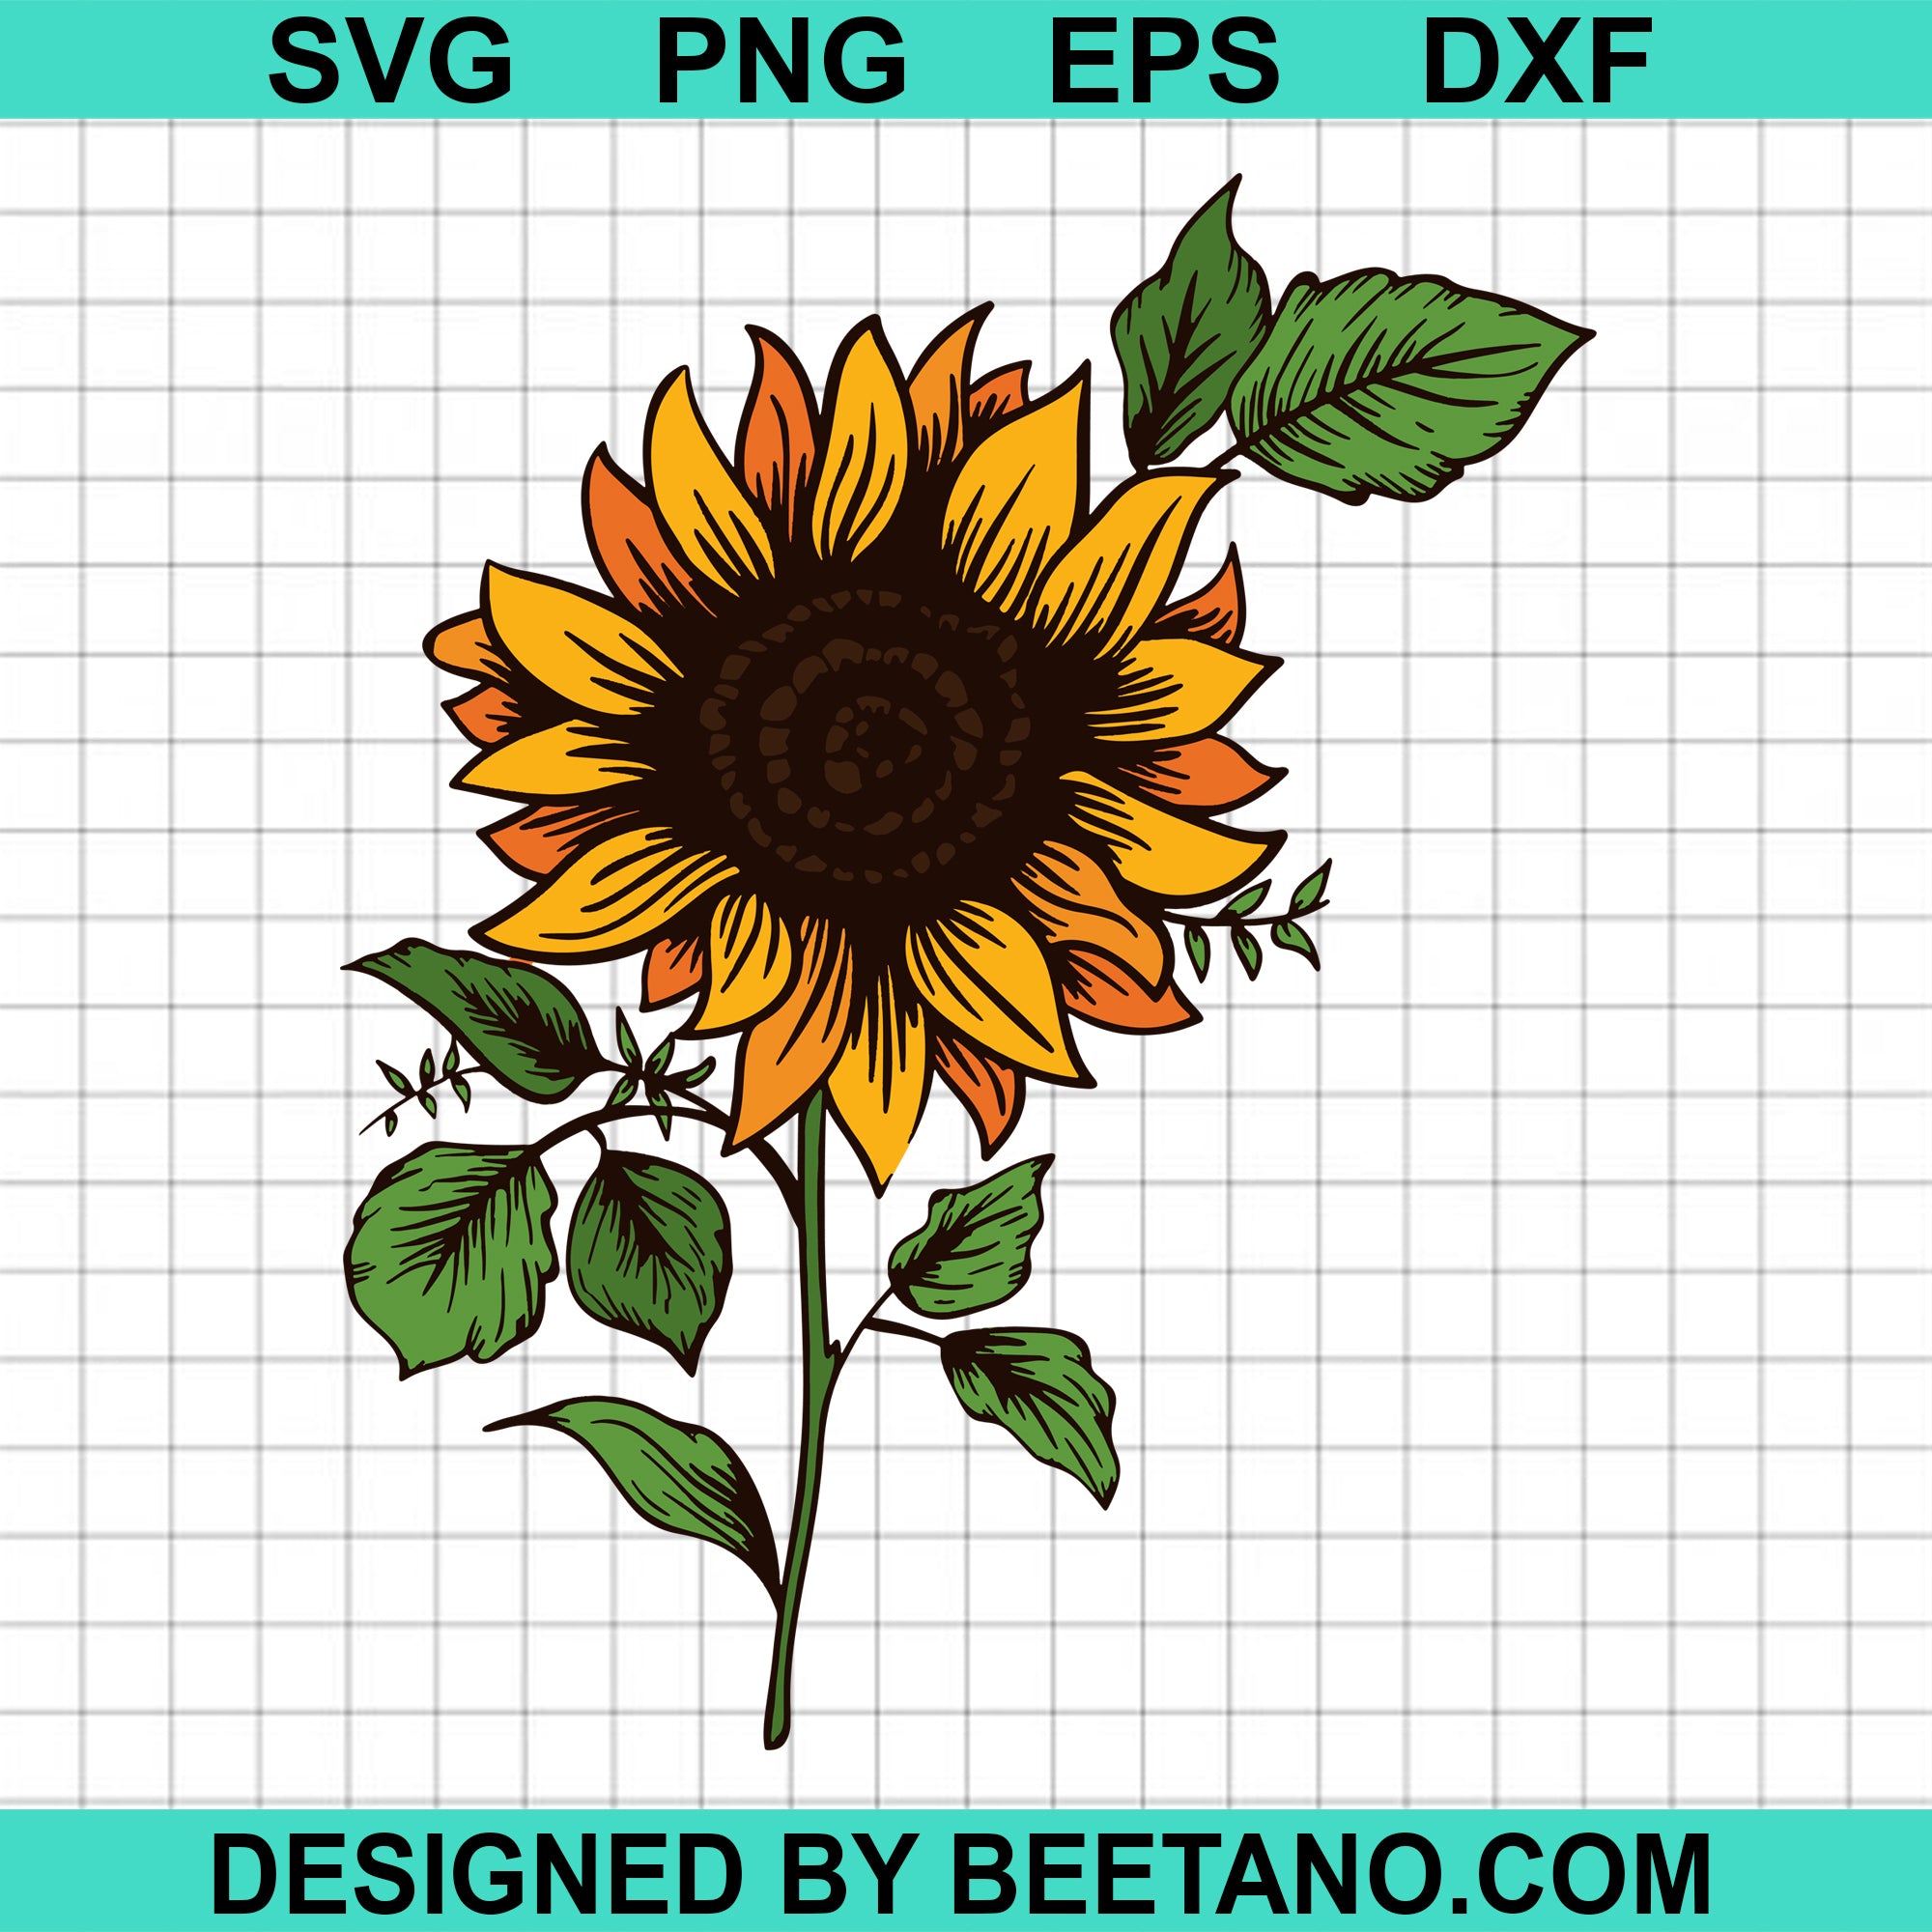 Download Sunflower Svg Sunflower High Quality Svg Cut Files For Cricut Handmad Beetanosvg Scalable Vector Graphics